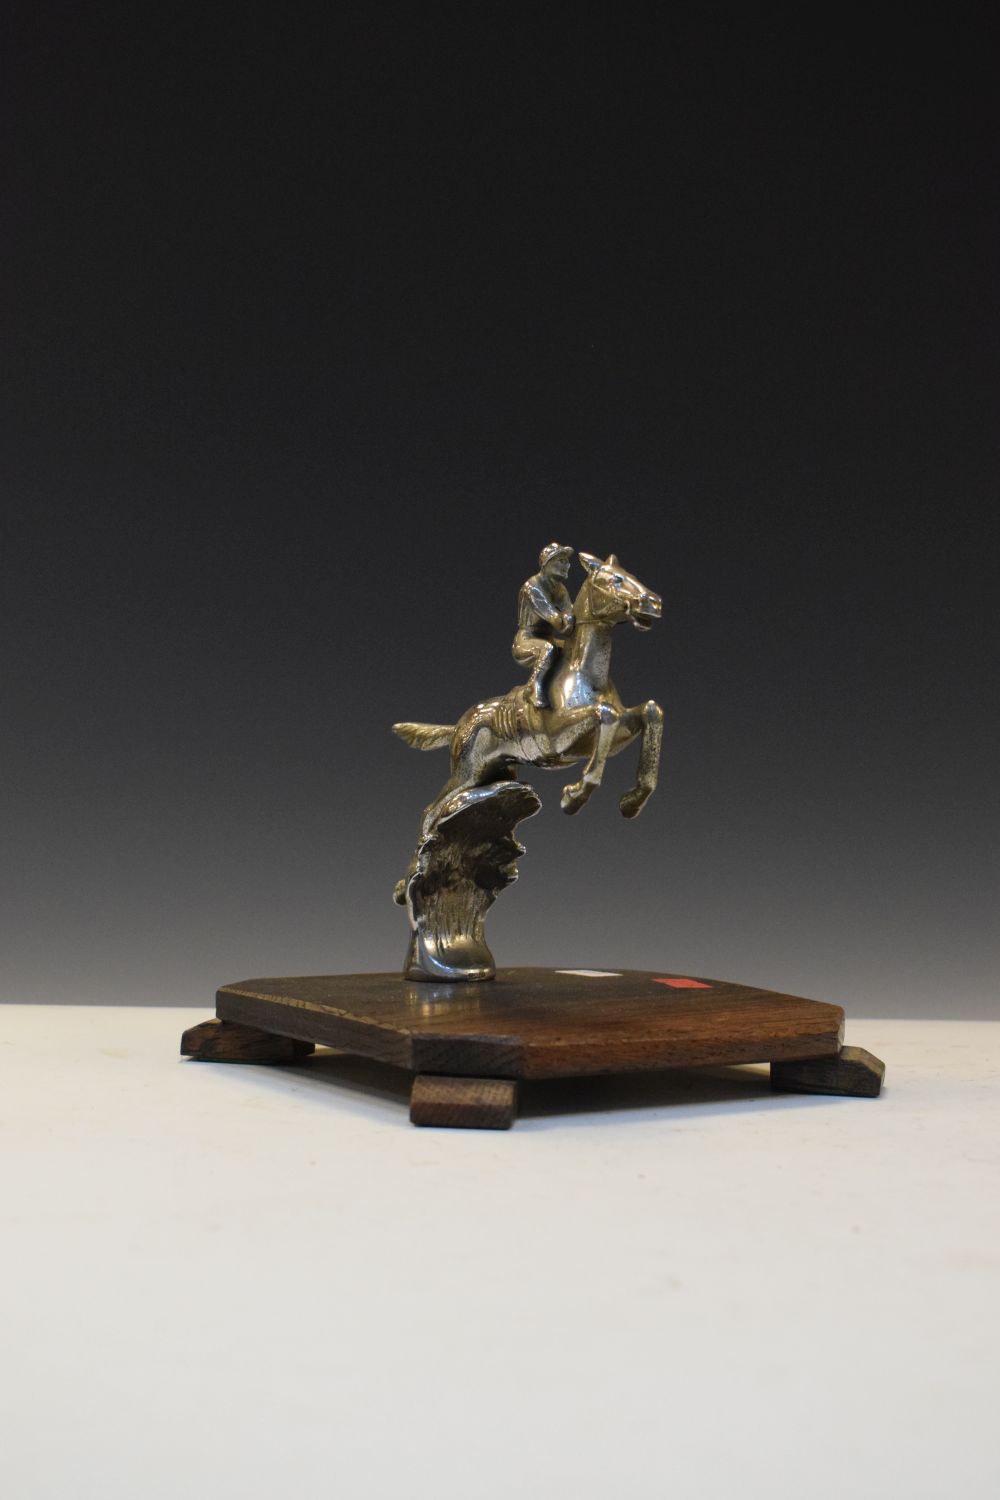 1930's chrome horse and jockey car mascot, attributed to Desmo, on wooden mount